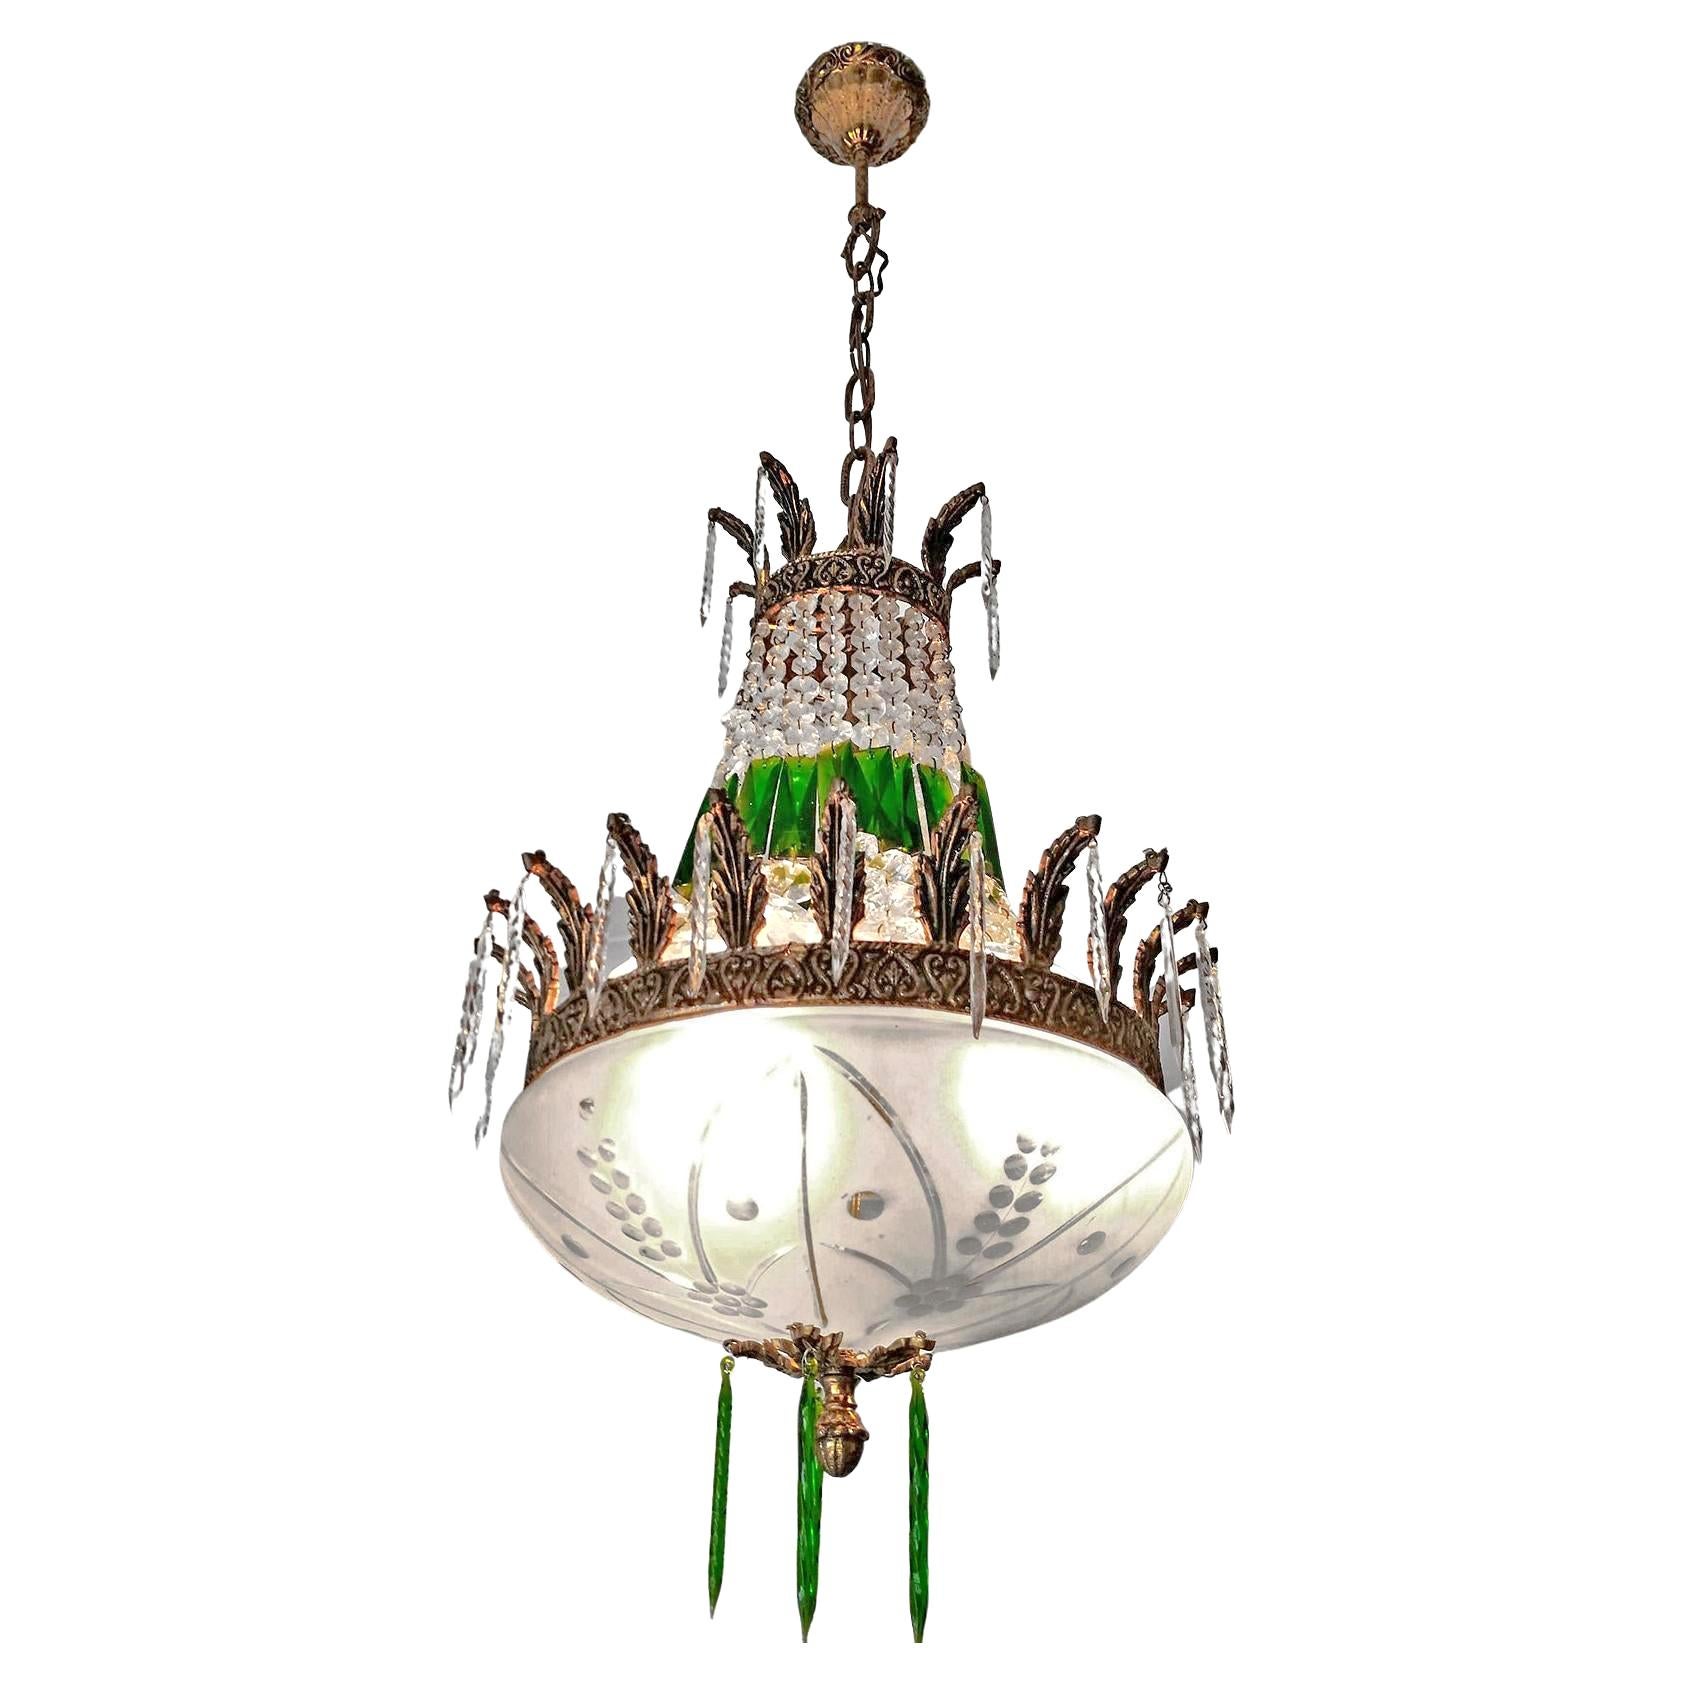 20th Century French Regency Empire Basket Chandelier Gilt Bronze and Green Cut Crystal & Bowl For Sale